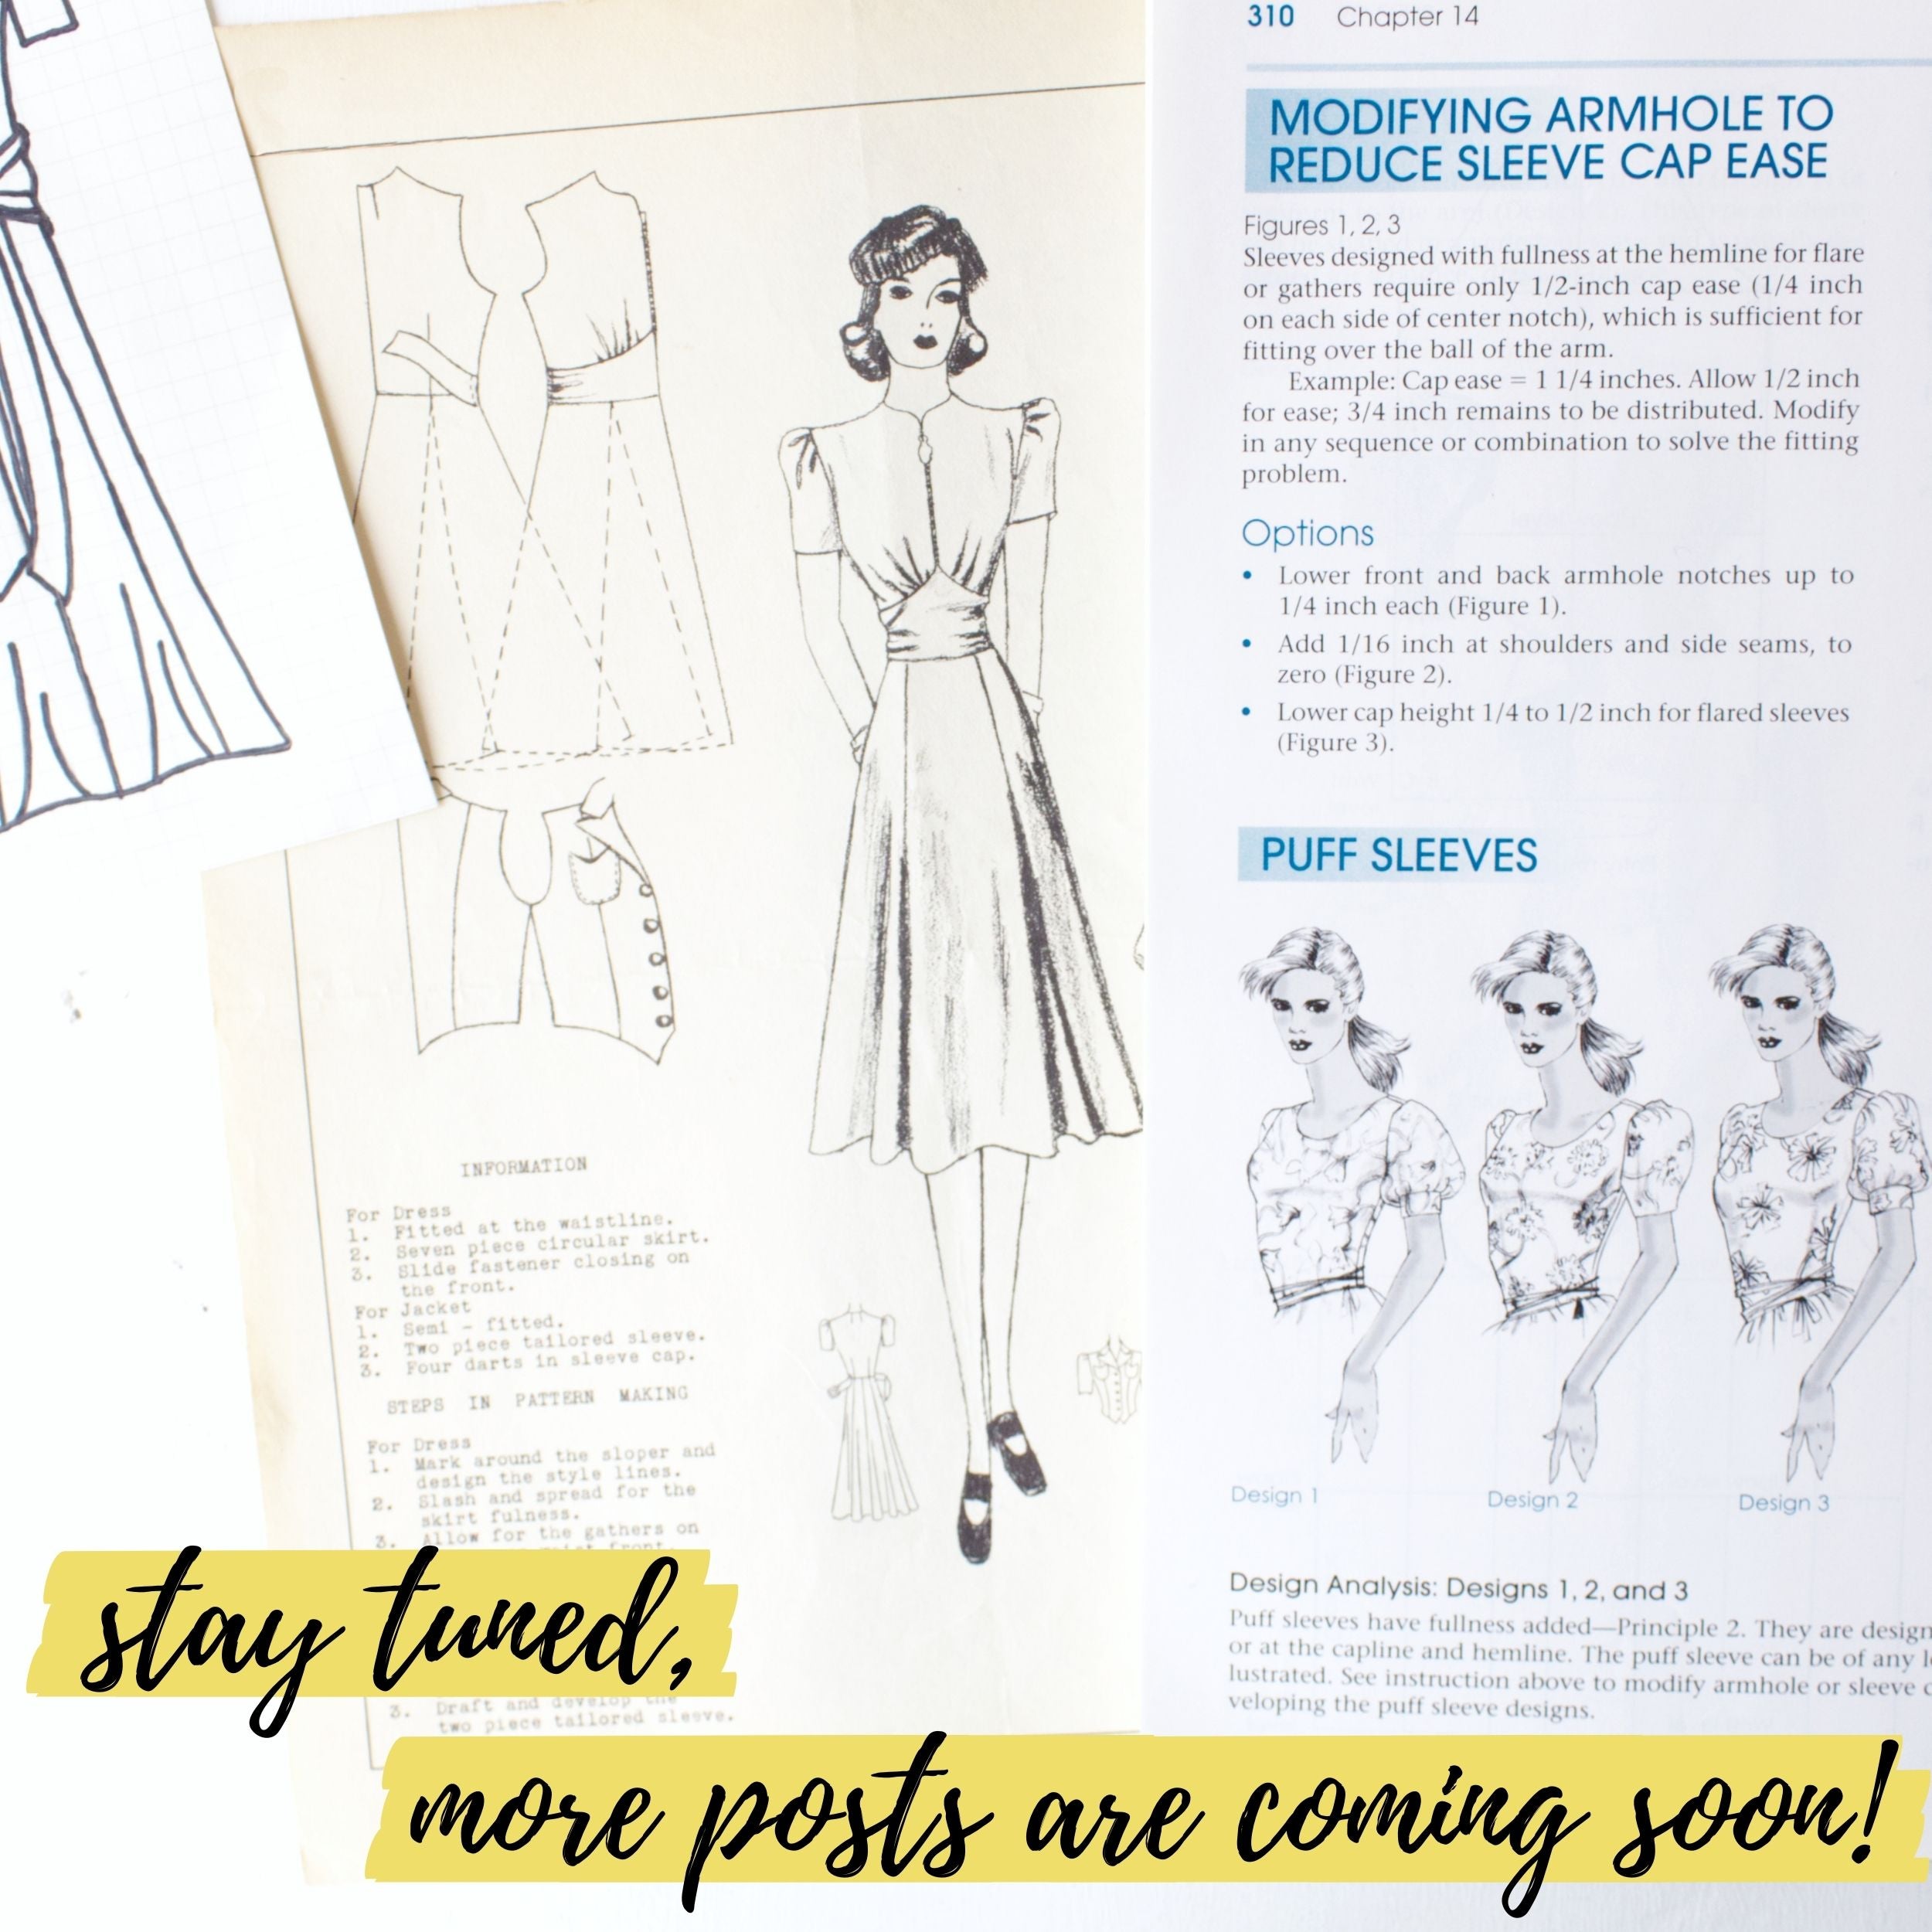 Stay tuned, more vintage sewing pattern posts are coming soon!